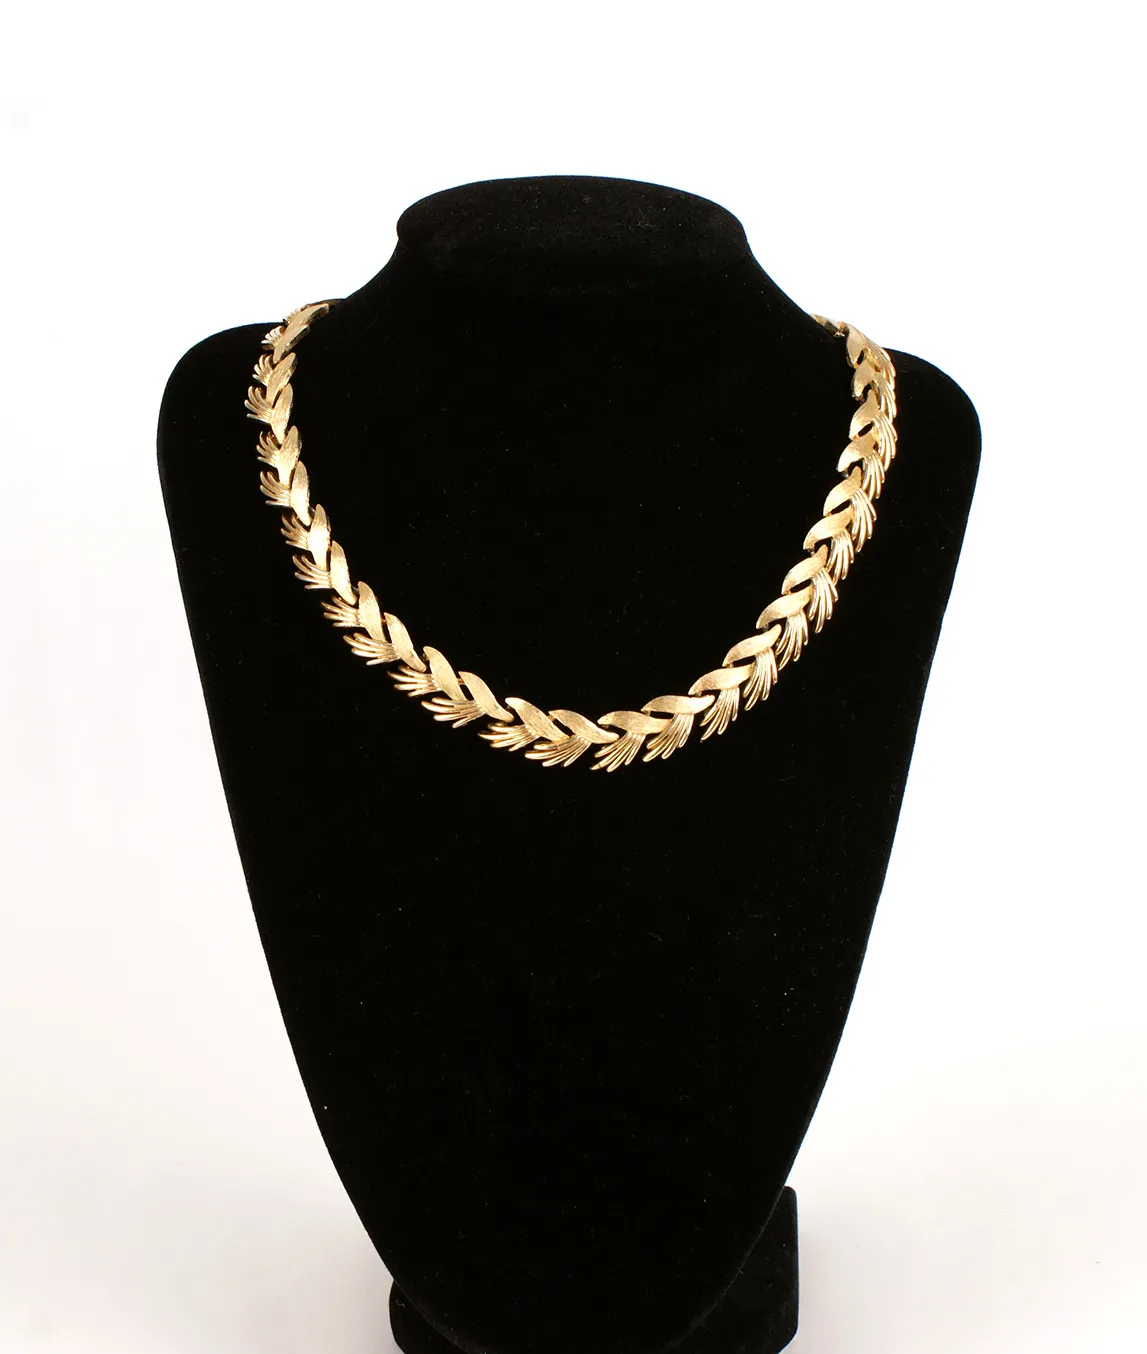 Trifari necklace on stand